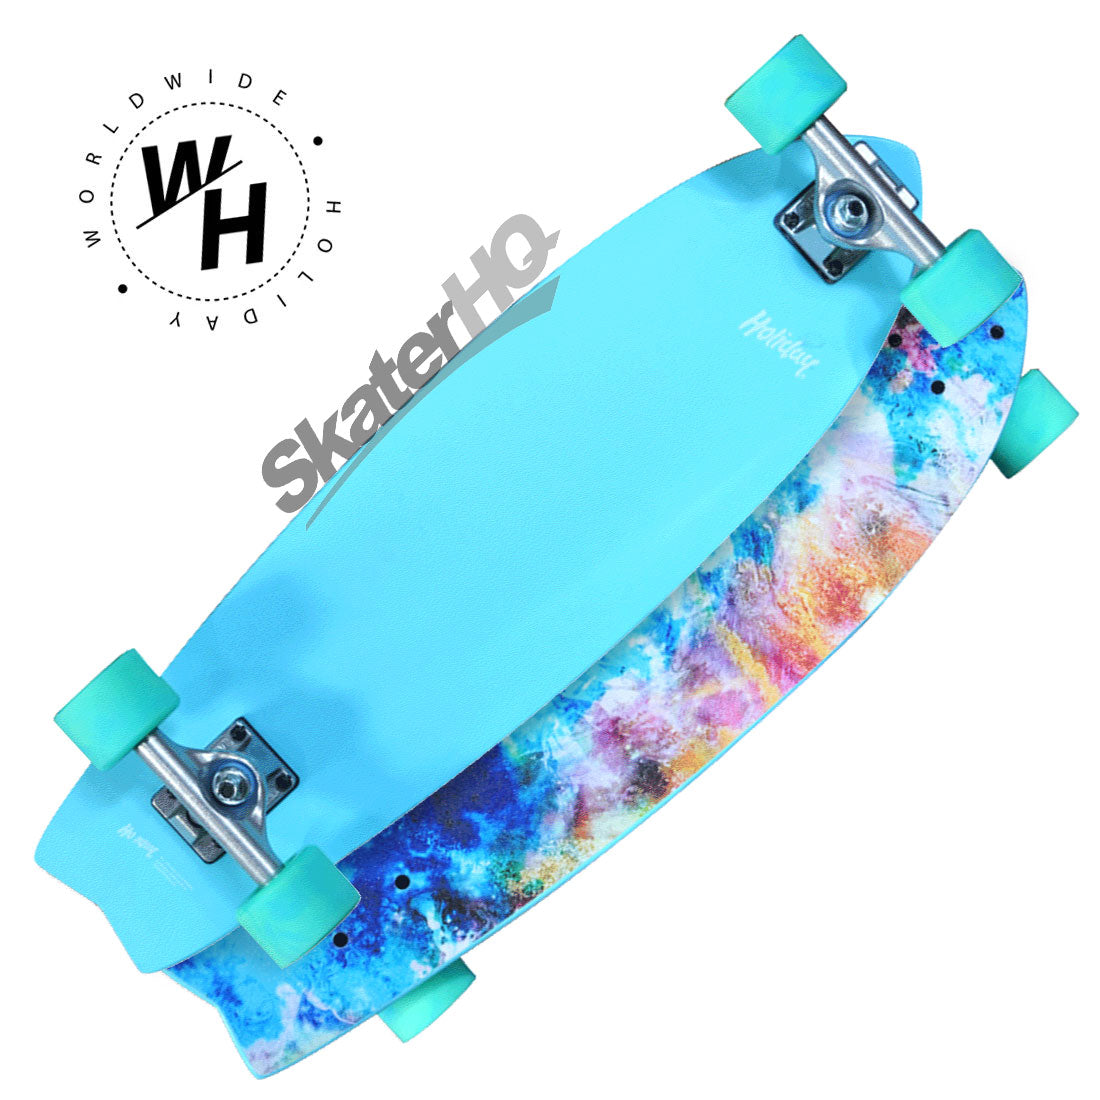 Holiday Cosmic Crush 28 Cruiser Complete - Sky Blue Skateboard Compl Cruisers